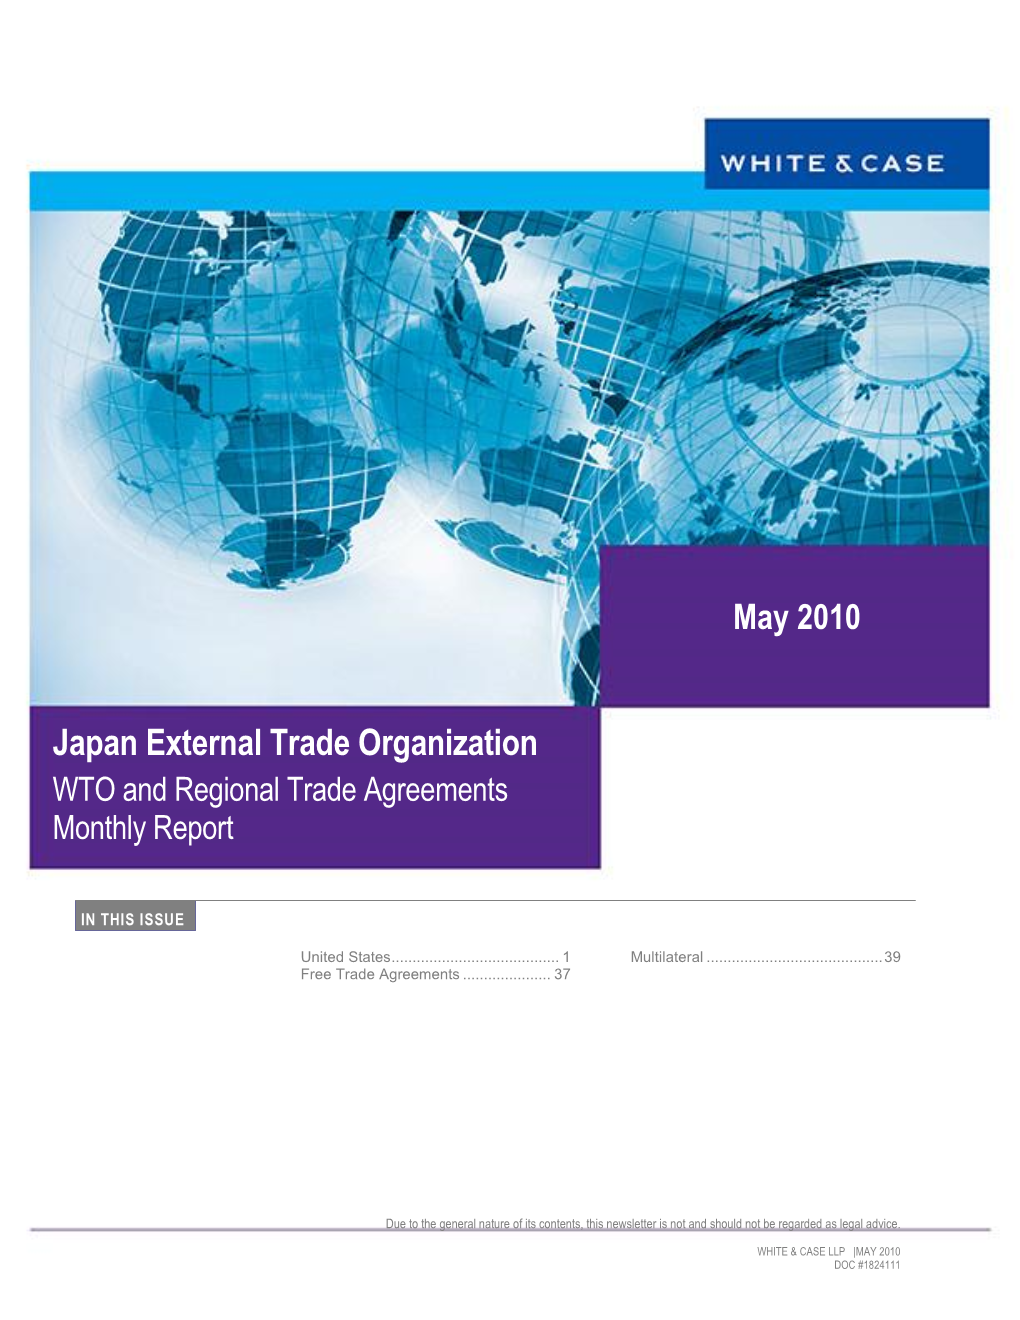 Japan External Trade Organization WTO and Regional Trade Agreements Monthly Report